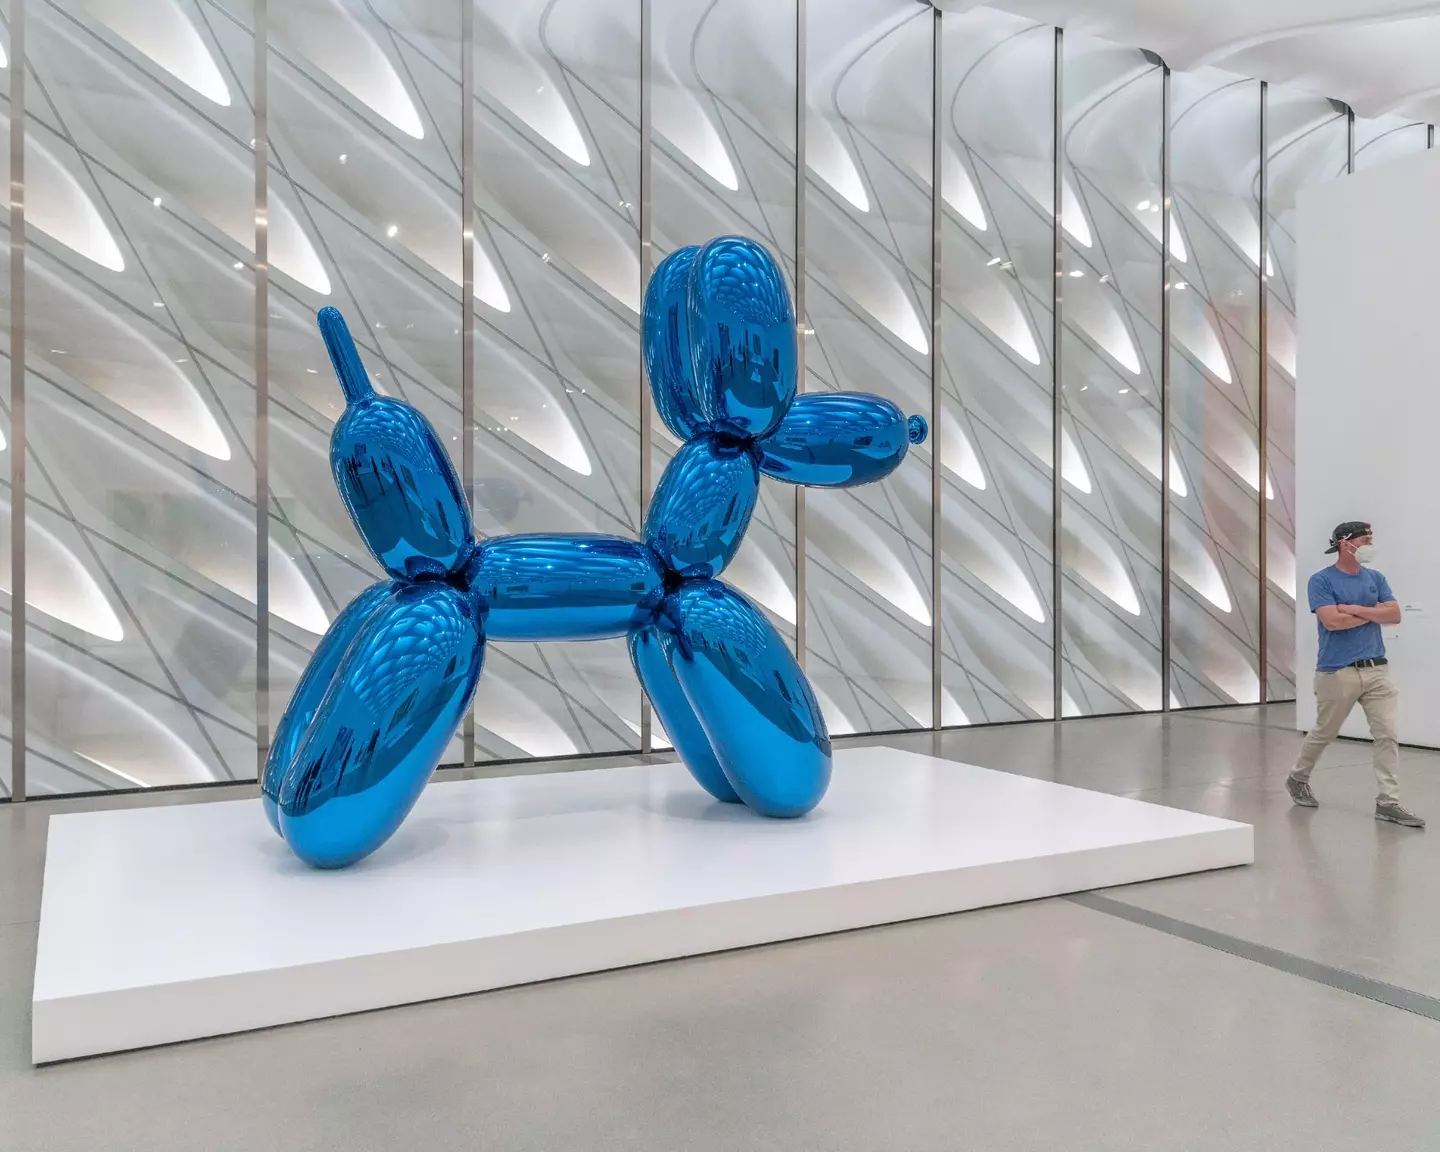 Koons' balloons come in all different sizes.